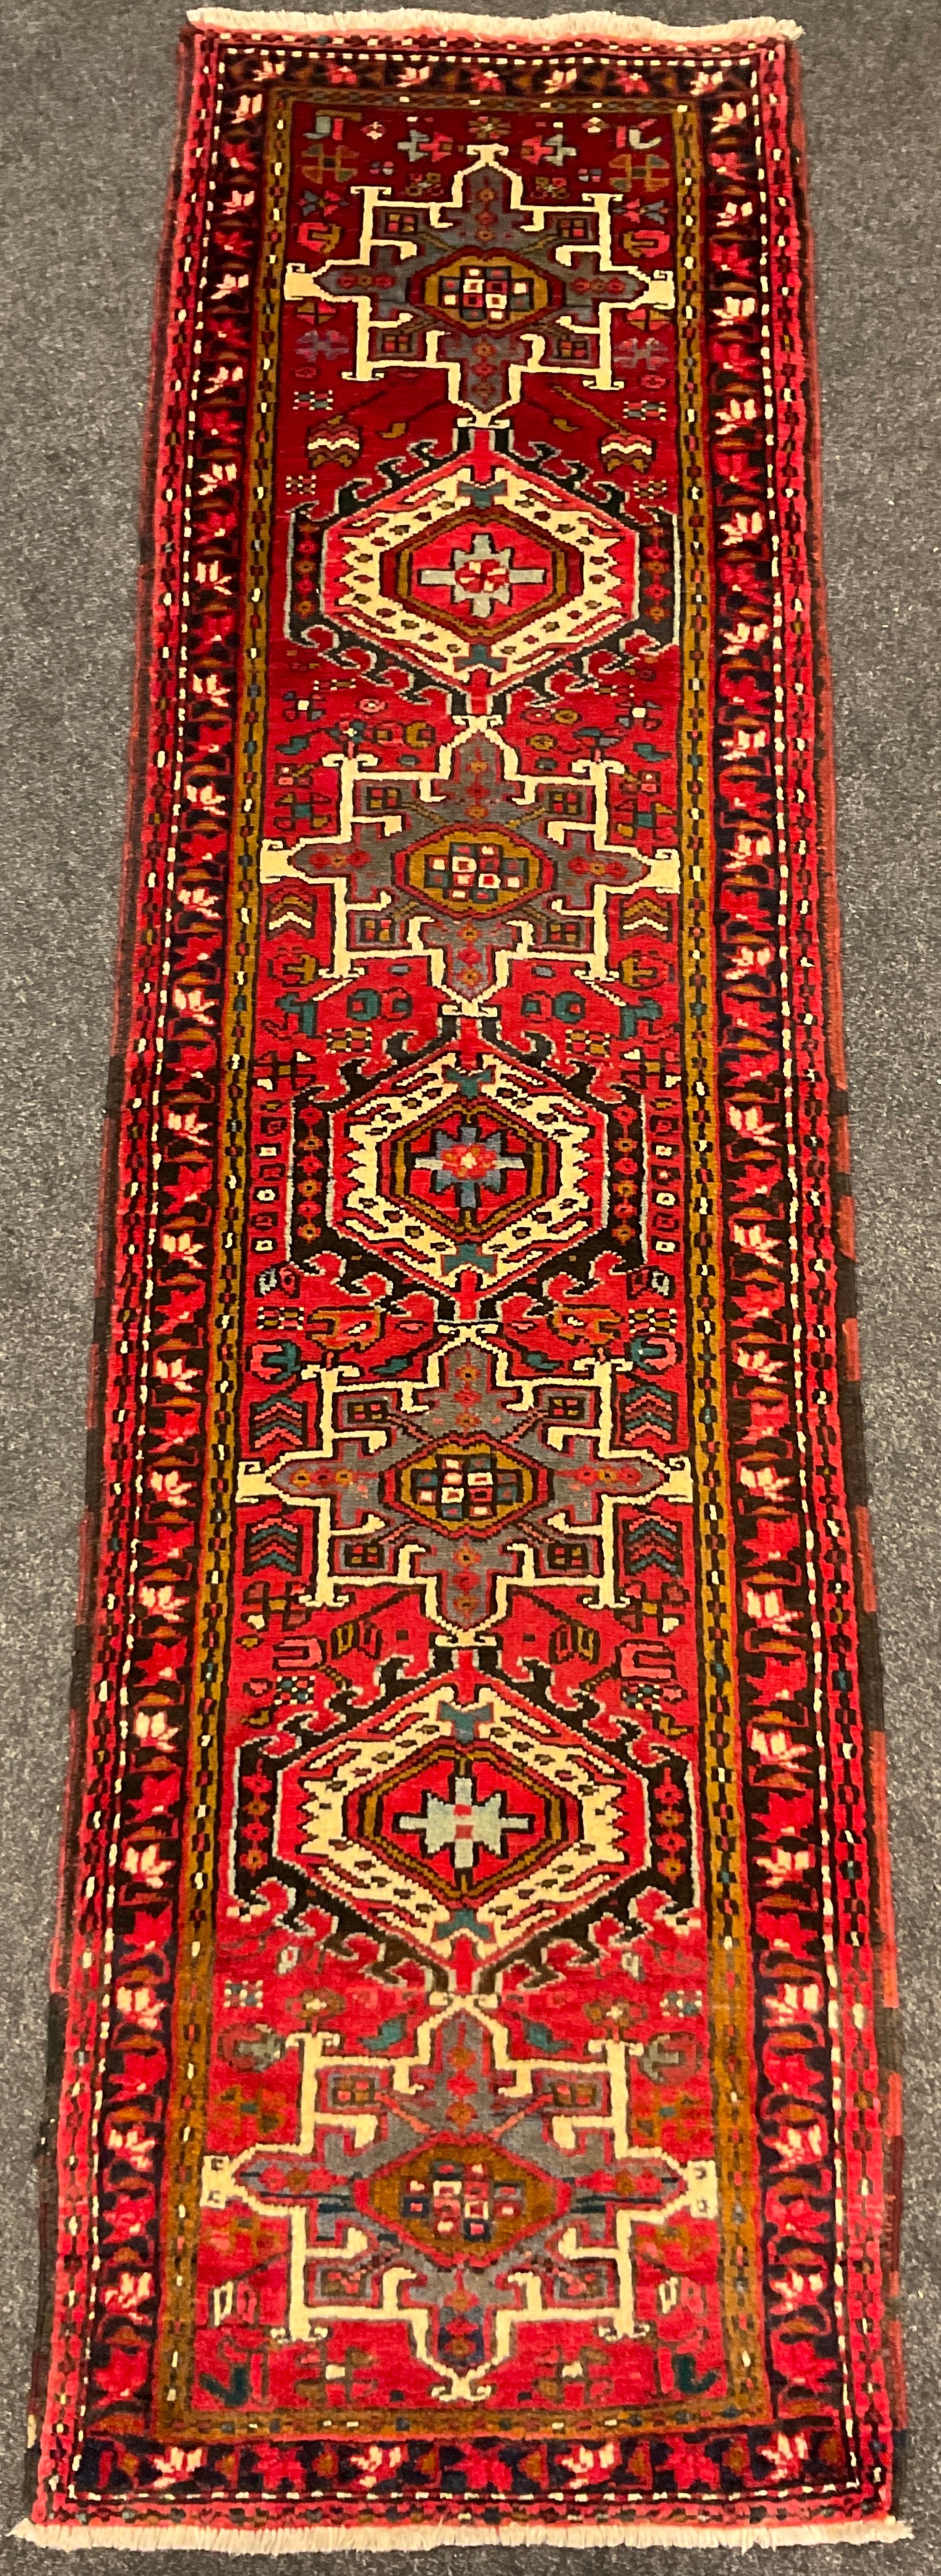 A North West Persian Heriz runner, hand-knotted in tones of red, black, blue, and cream, 275cm x